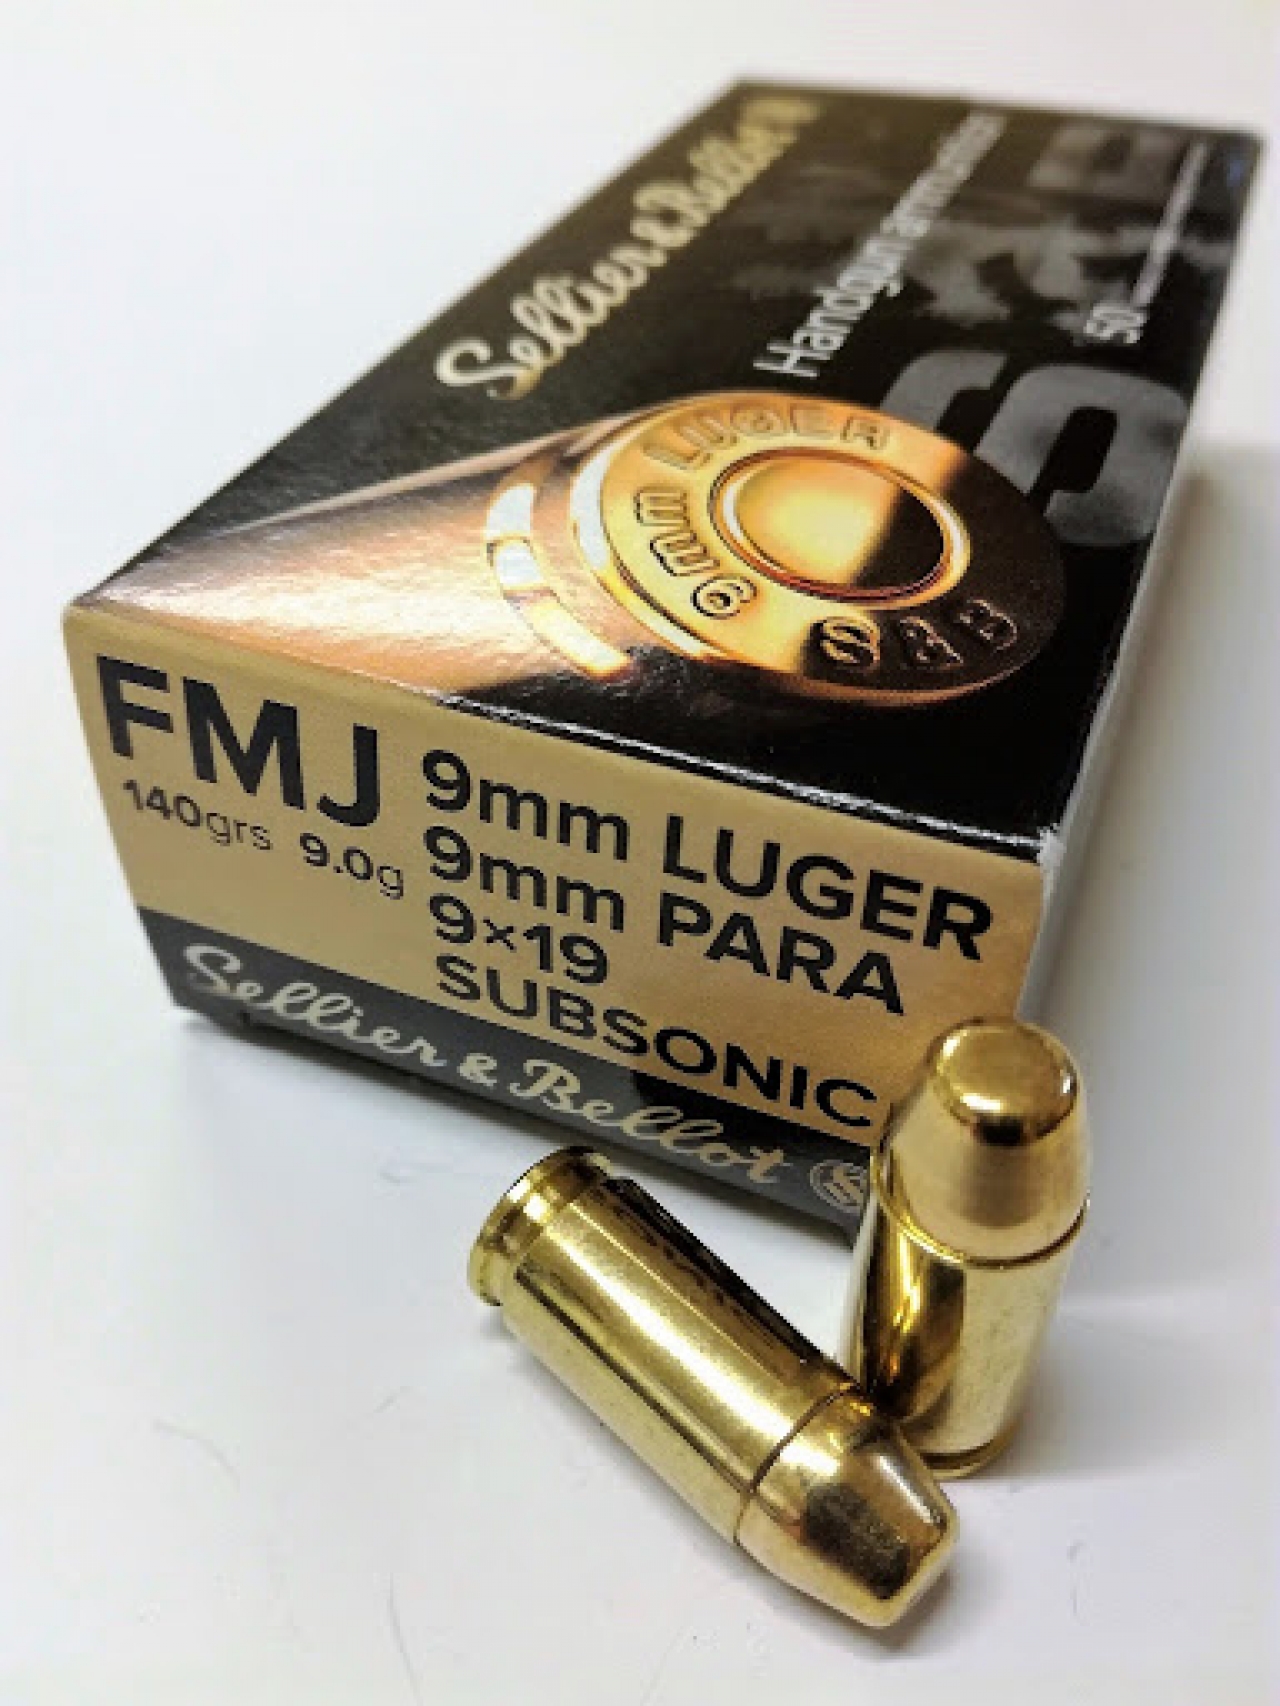 subsonic 9mm